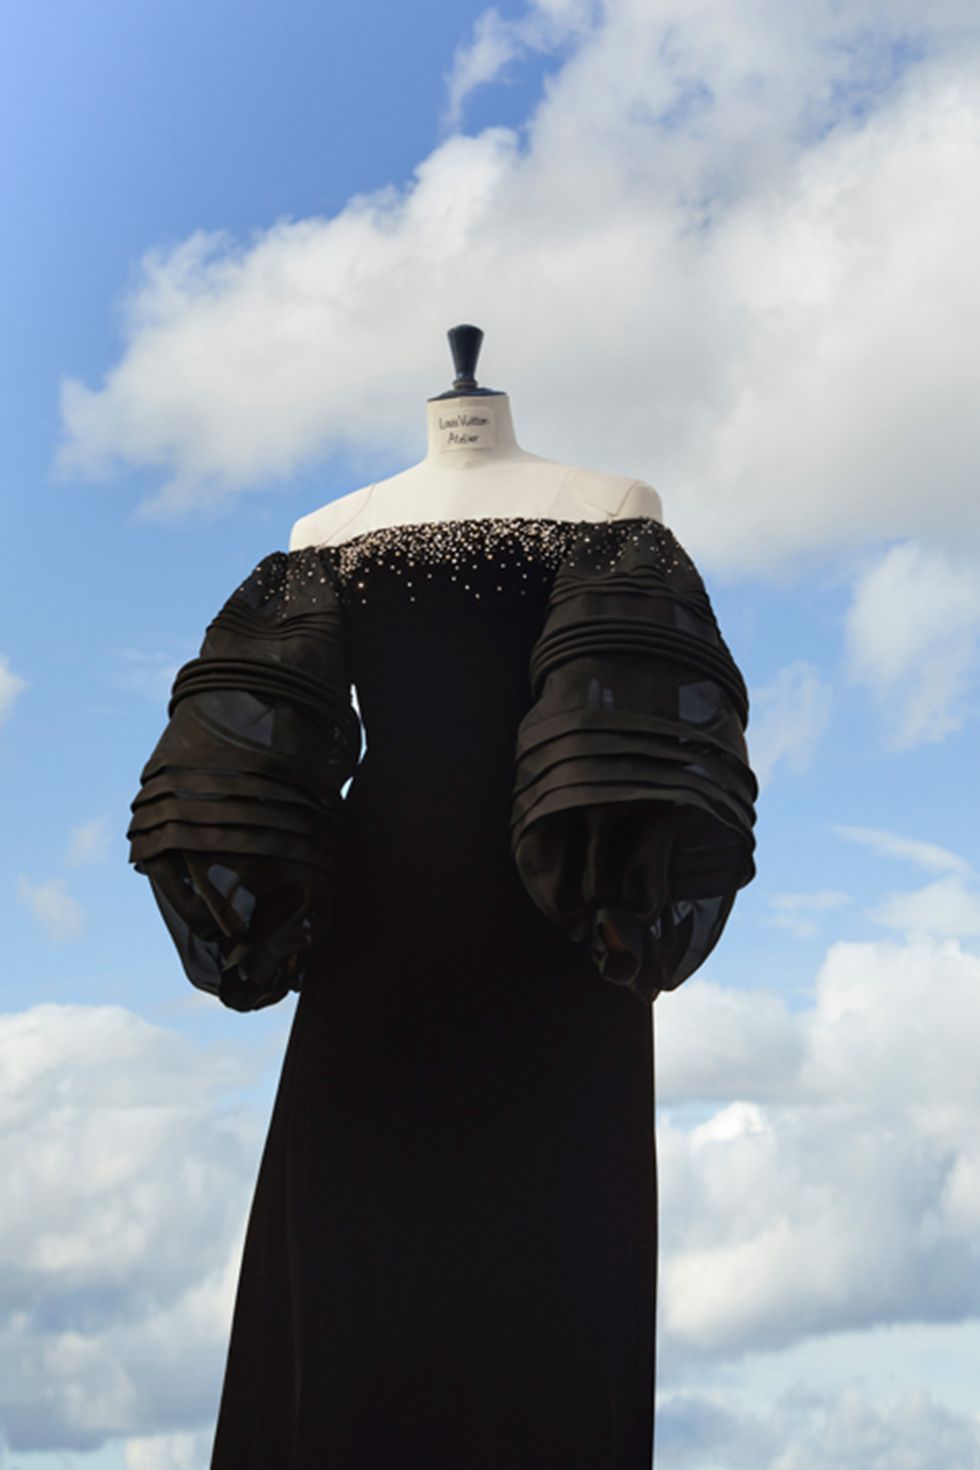 a statue of a person wearing a black suit and gloves